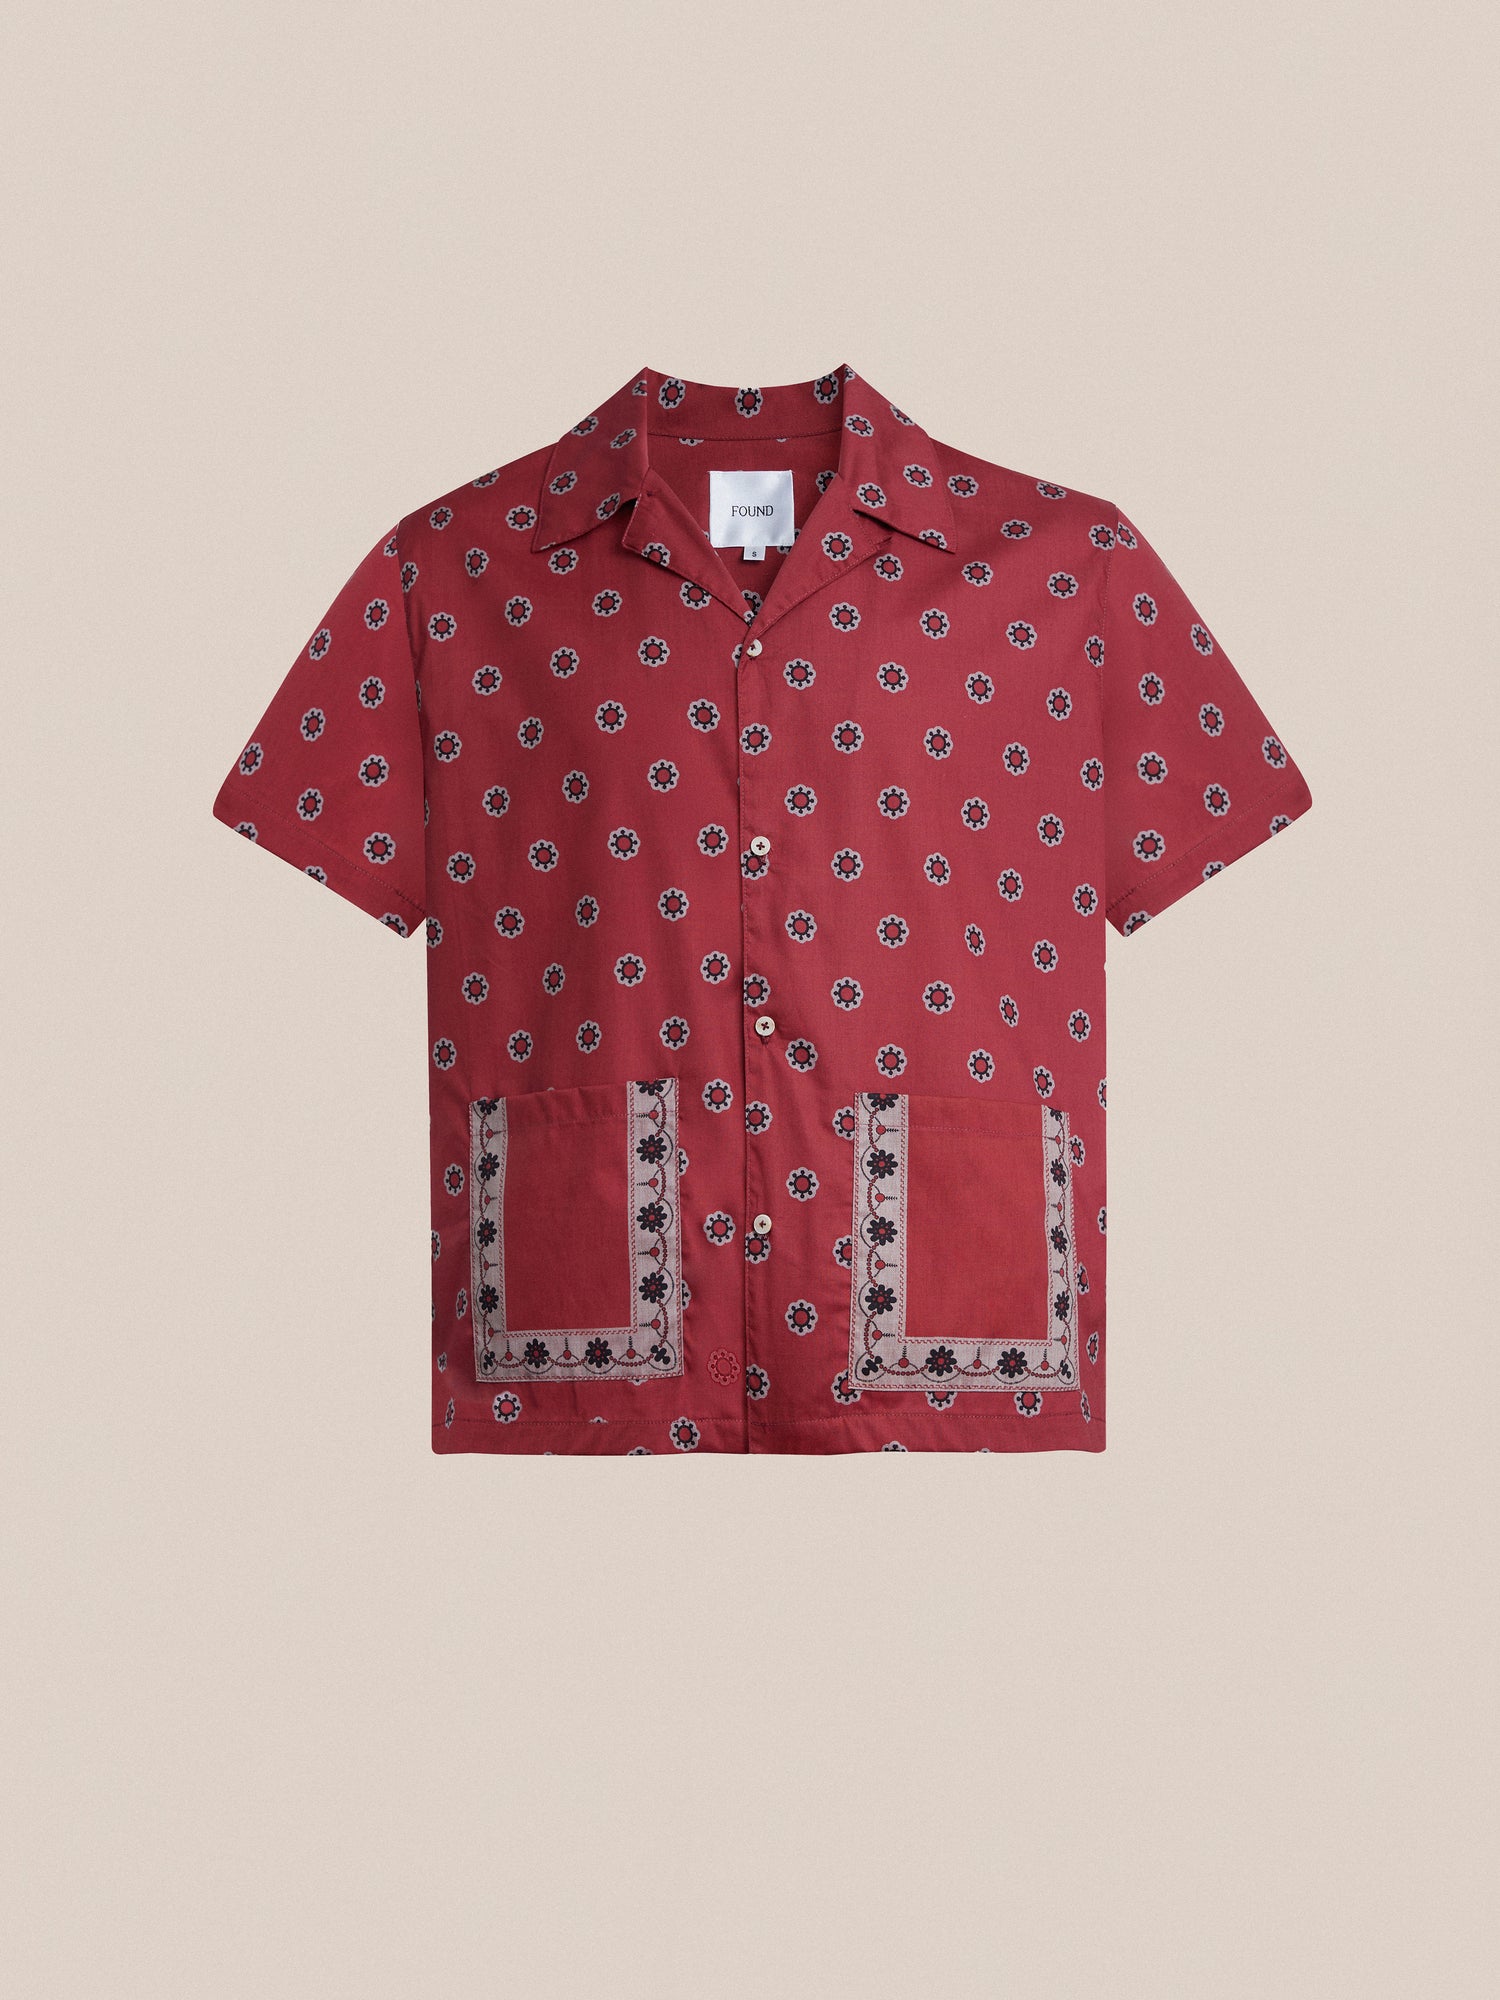 The Red Motif SS Camp Shirt in red with a geometric motif from Pakistan by Found.